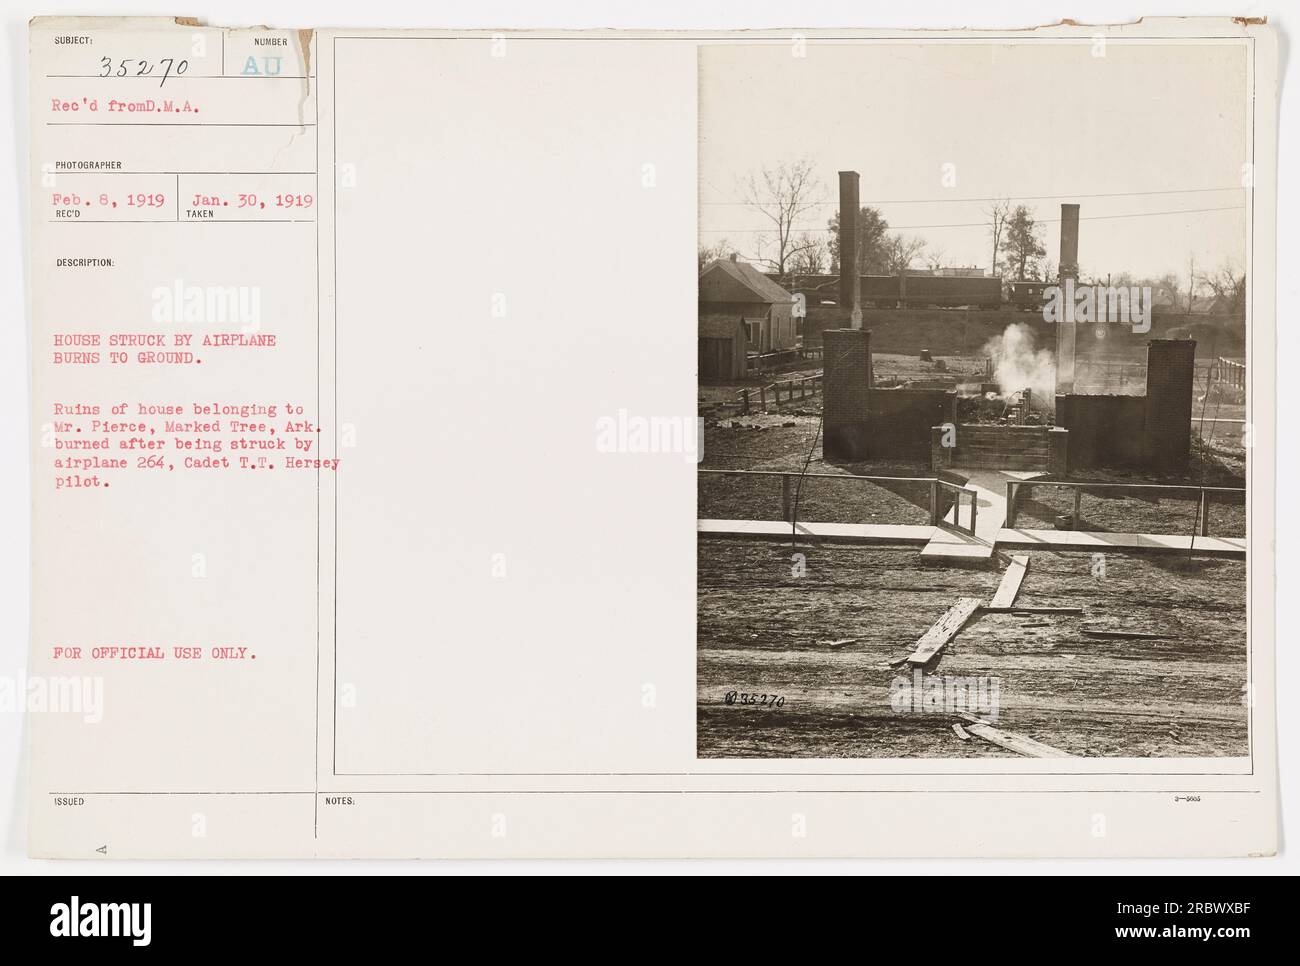 Ruins of a house belonging to Mr. Pierce in Marked Tree, Arkansas burned to the ground after being struck by an airplane flown by Cadet T.T. Hersey. The incident occurred on January 30, 1919, and this photograph was taken on February 8th, 1919. The image is labeled as subject 35270 and is classified for official use only. Stock Photo